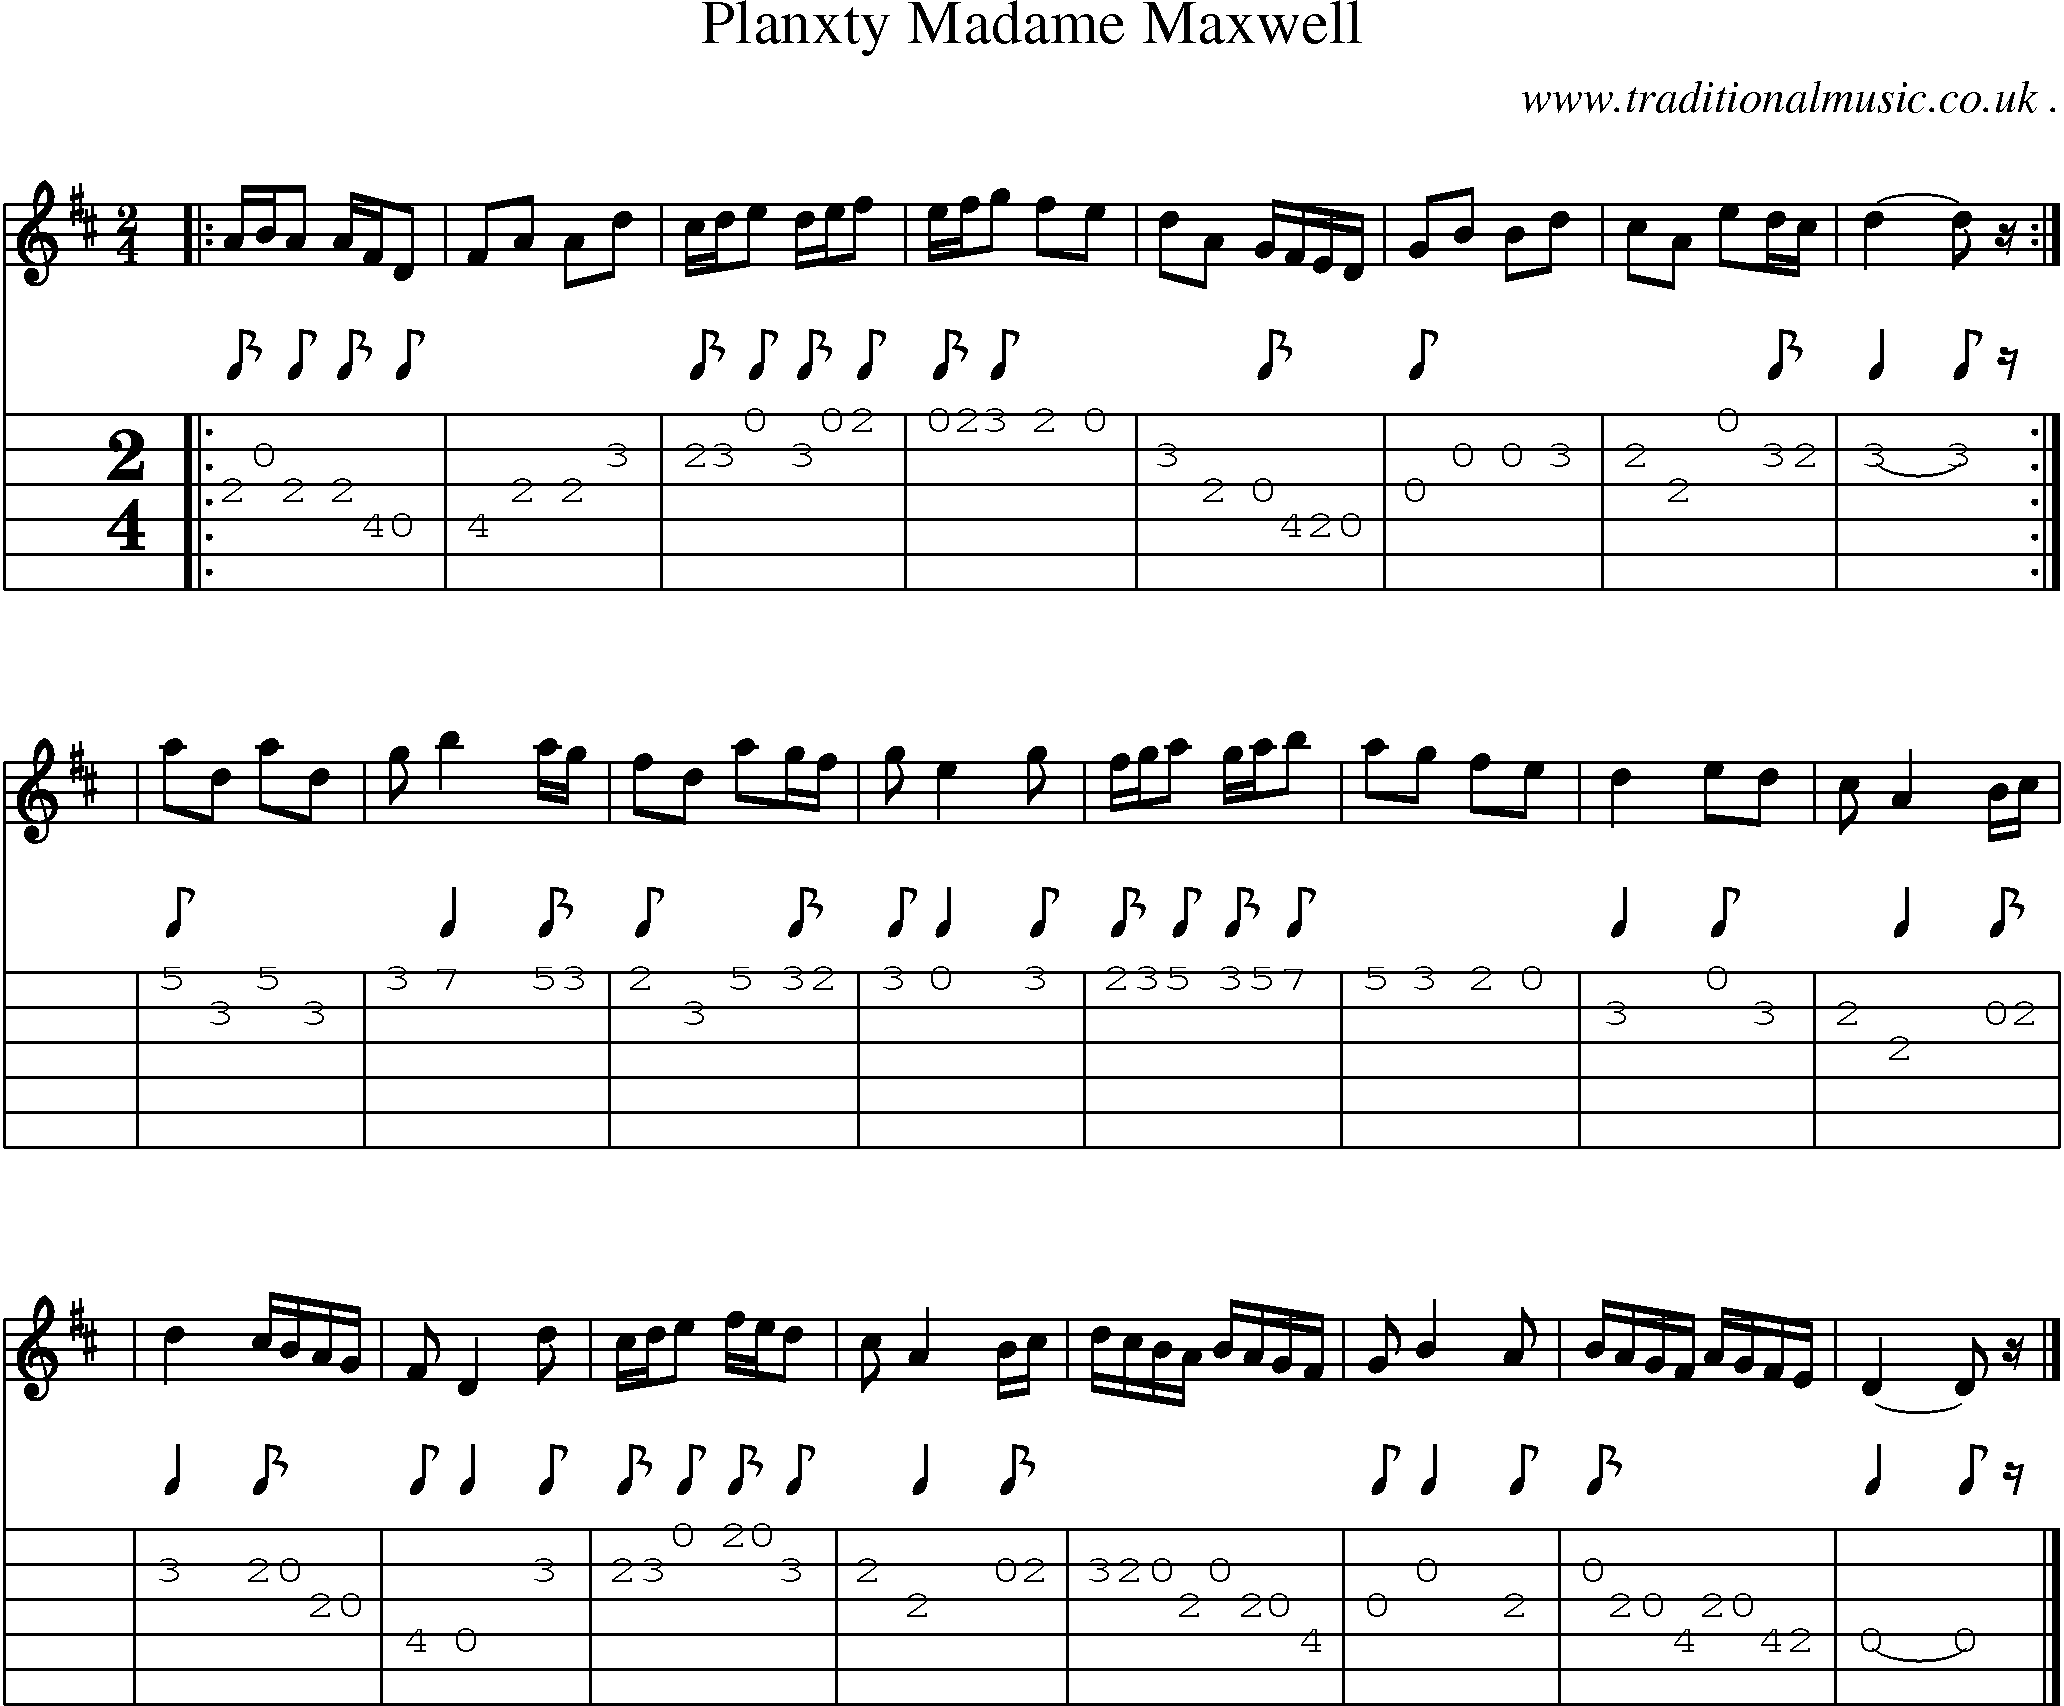 Sheet-music  score, Chords and Guitar Tabs for Planxty Madame Maxwell